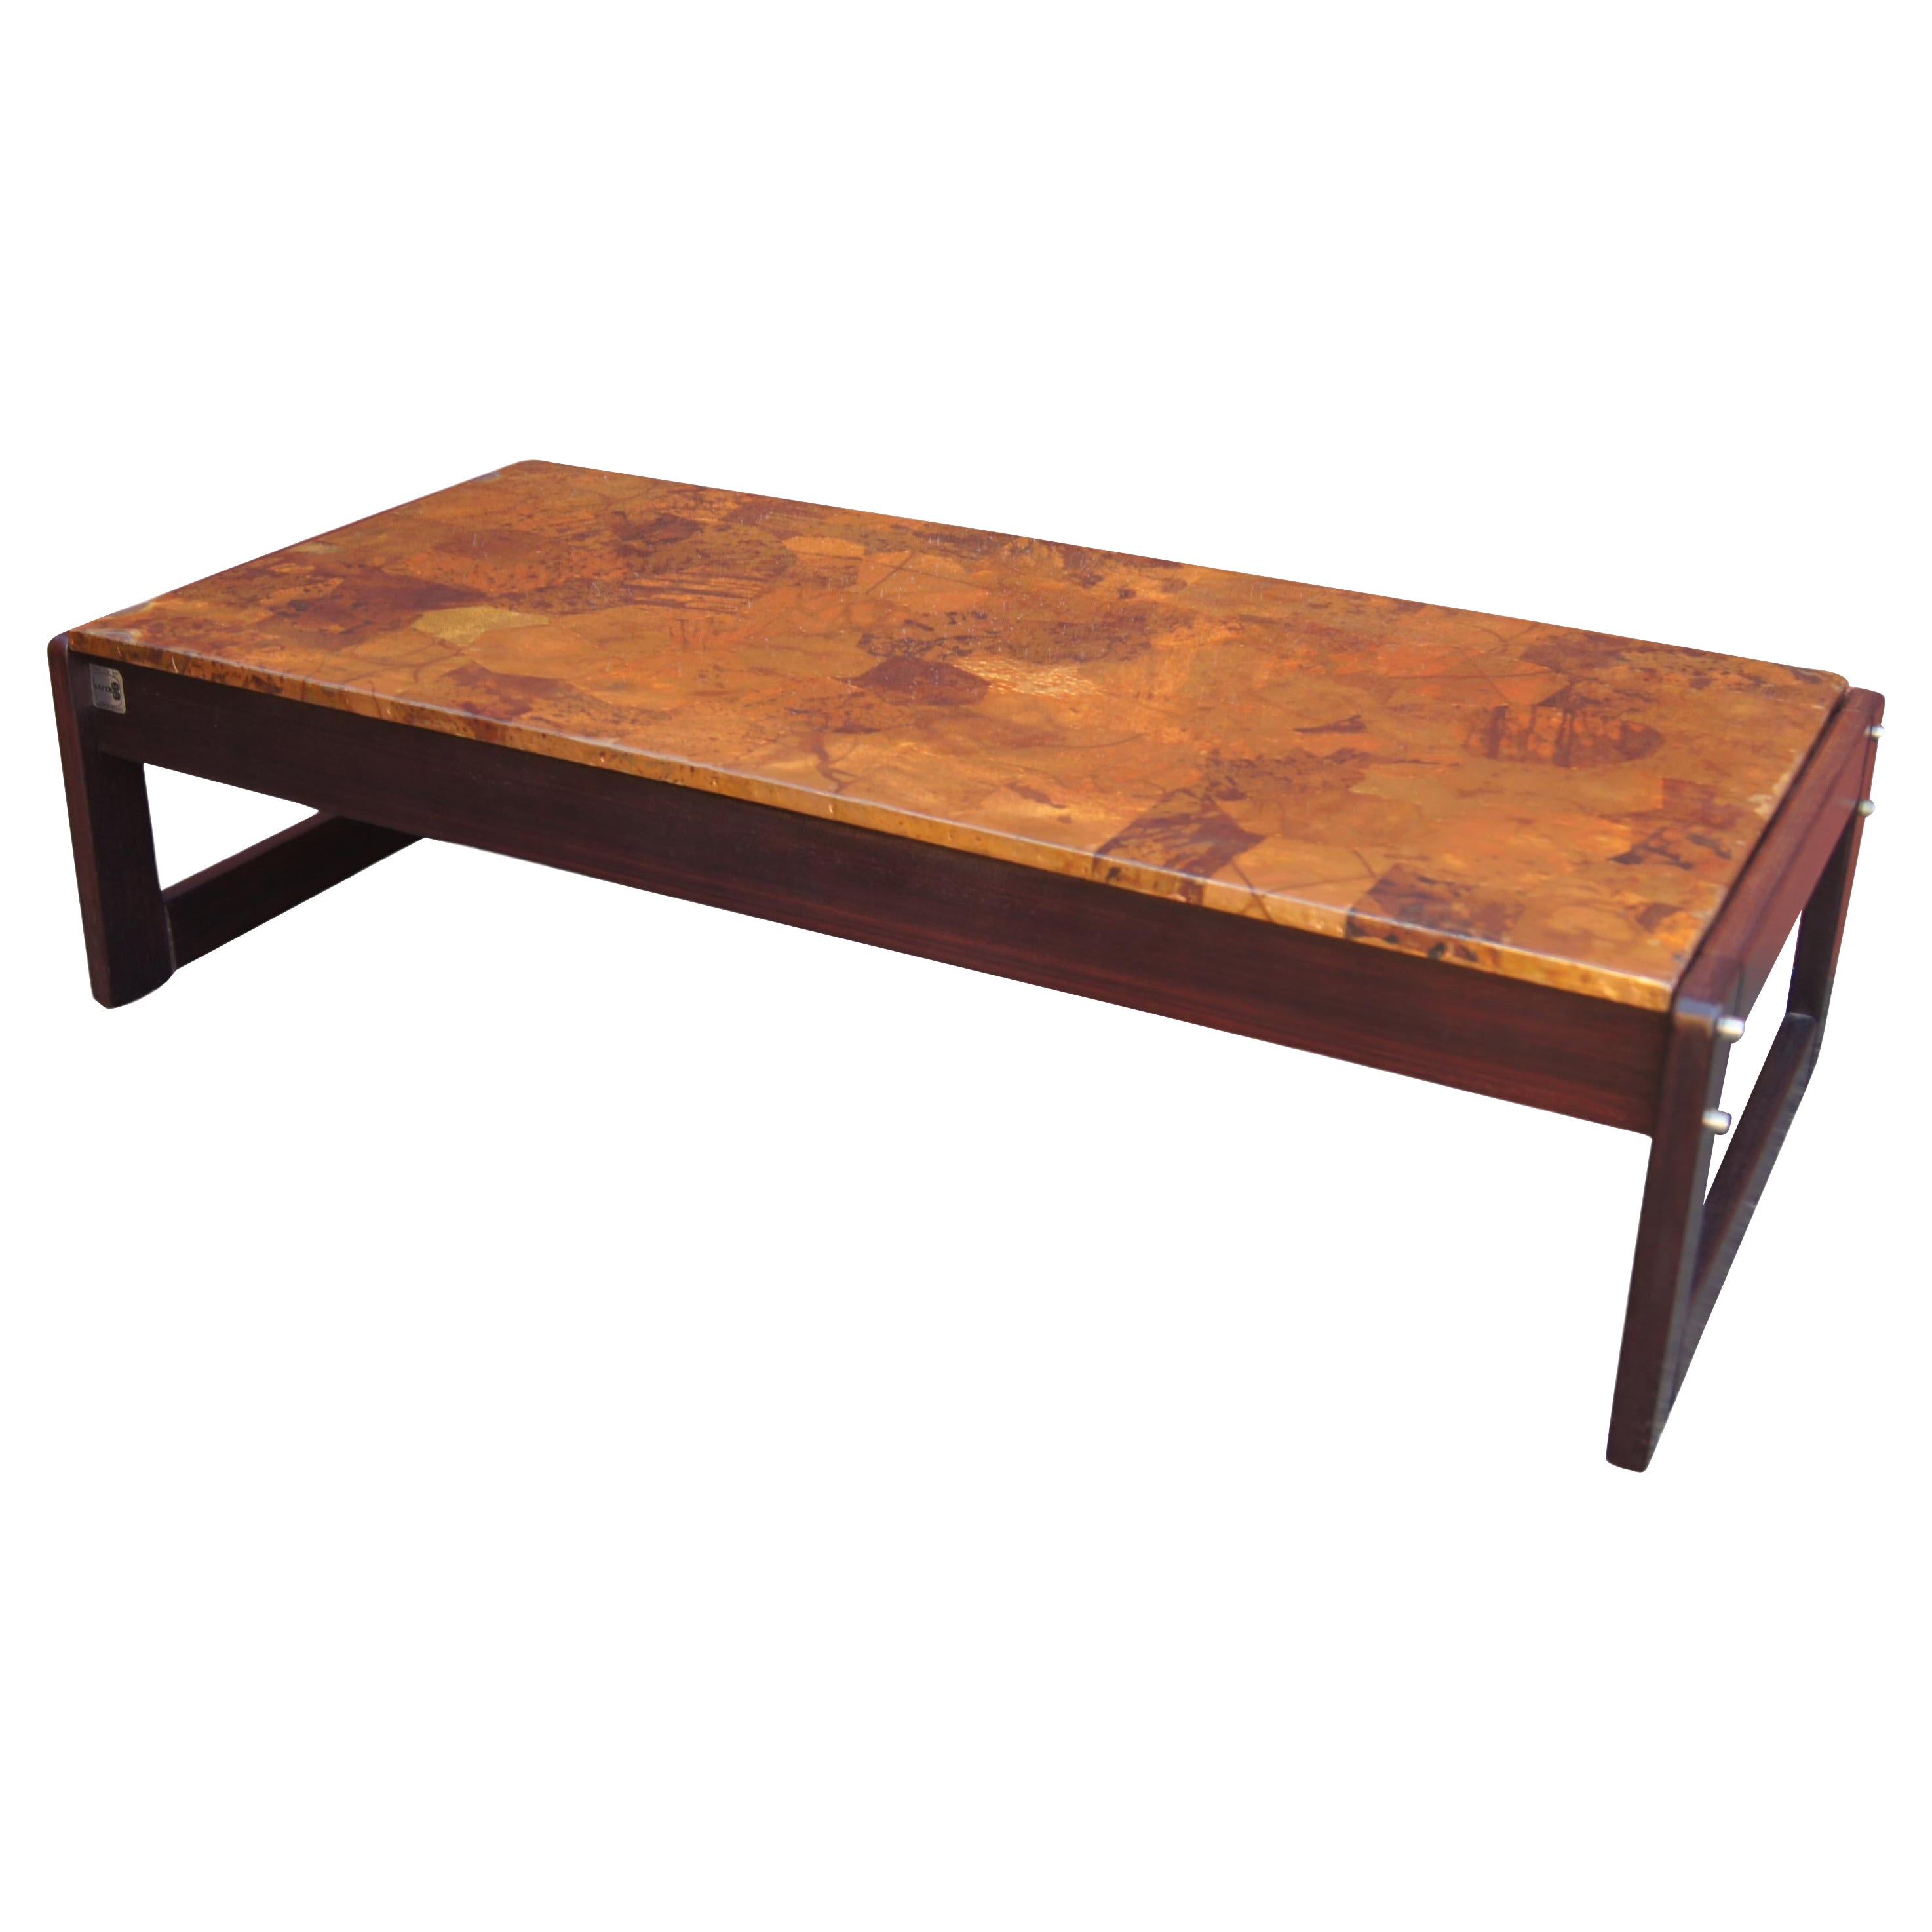 Rosewood and Patchwork Copper Coffee Table by Percival Lafer